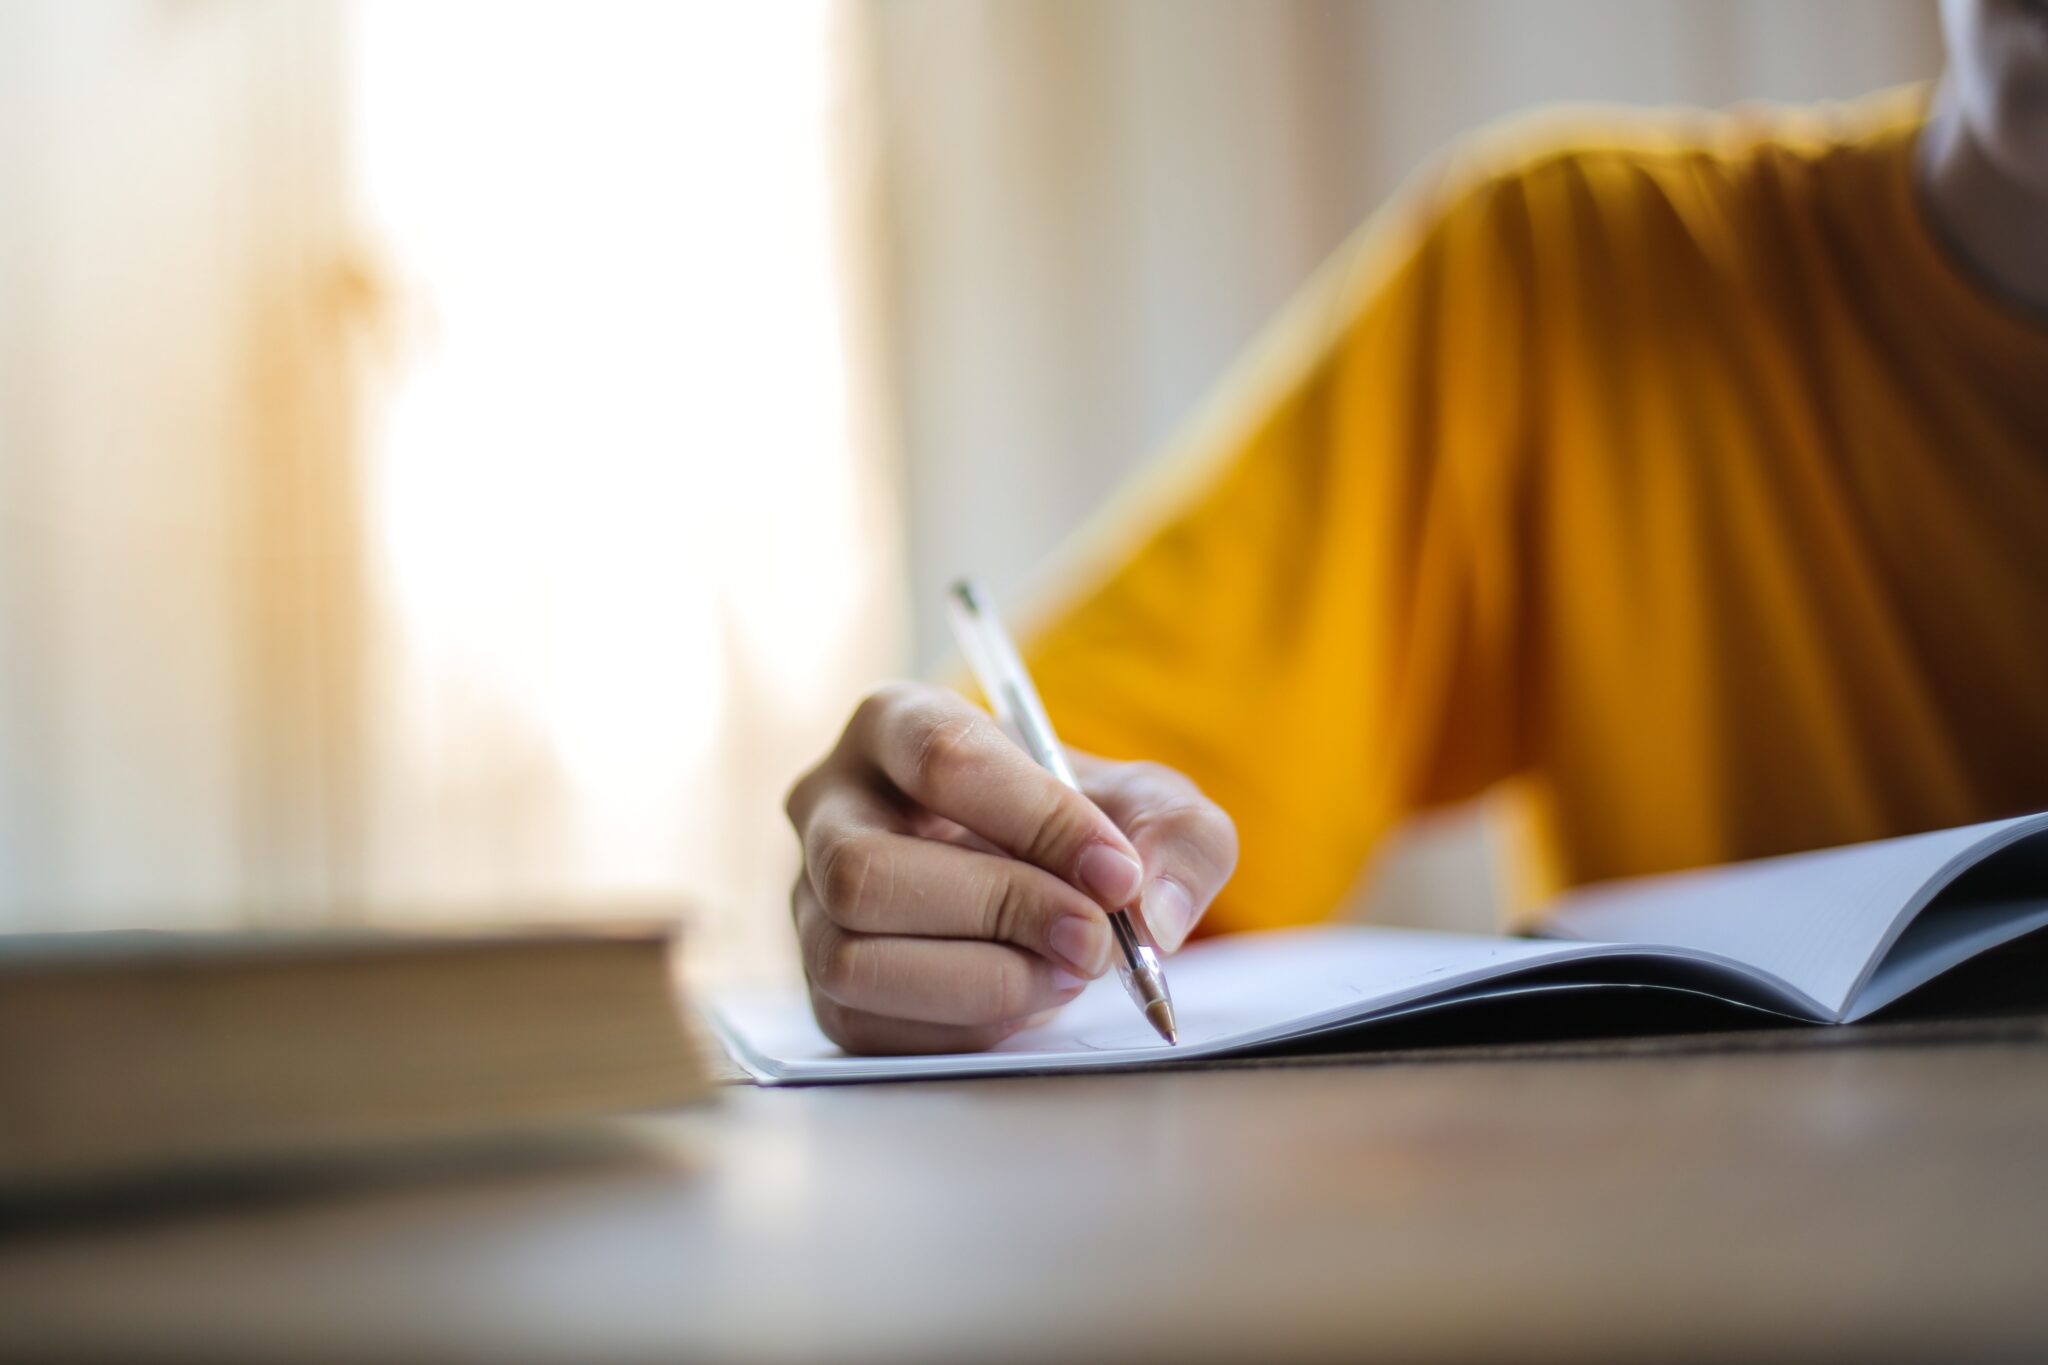 Transcreators are often copywriters experienced in marketing. Description: a person in a yellow shirt writing with a pen in a notebook, which is on a desk.